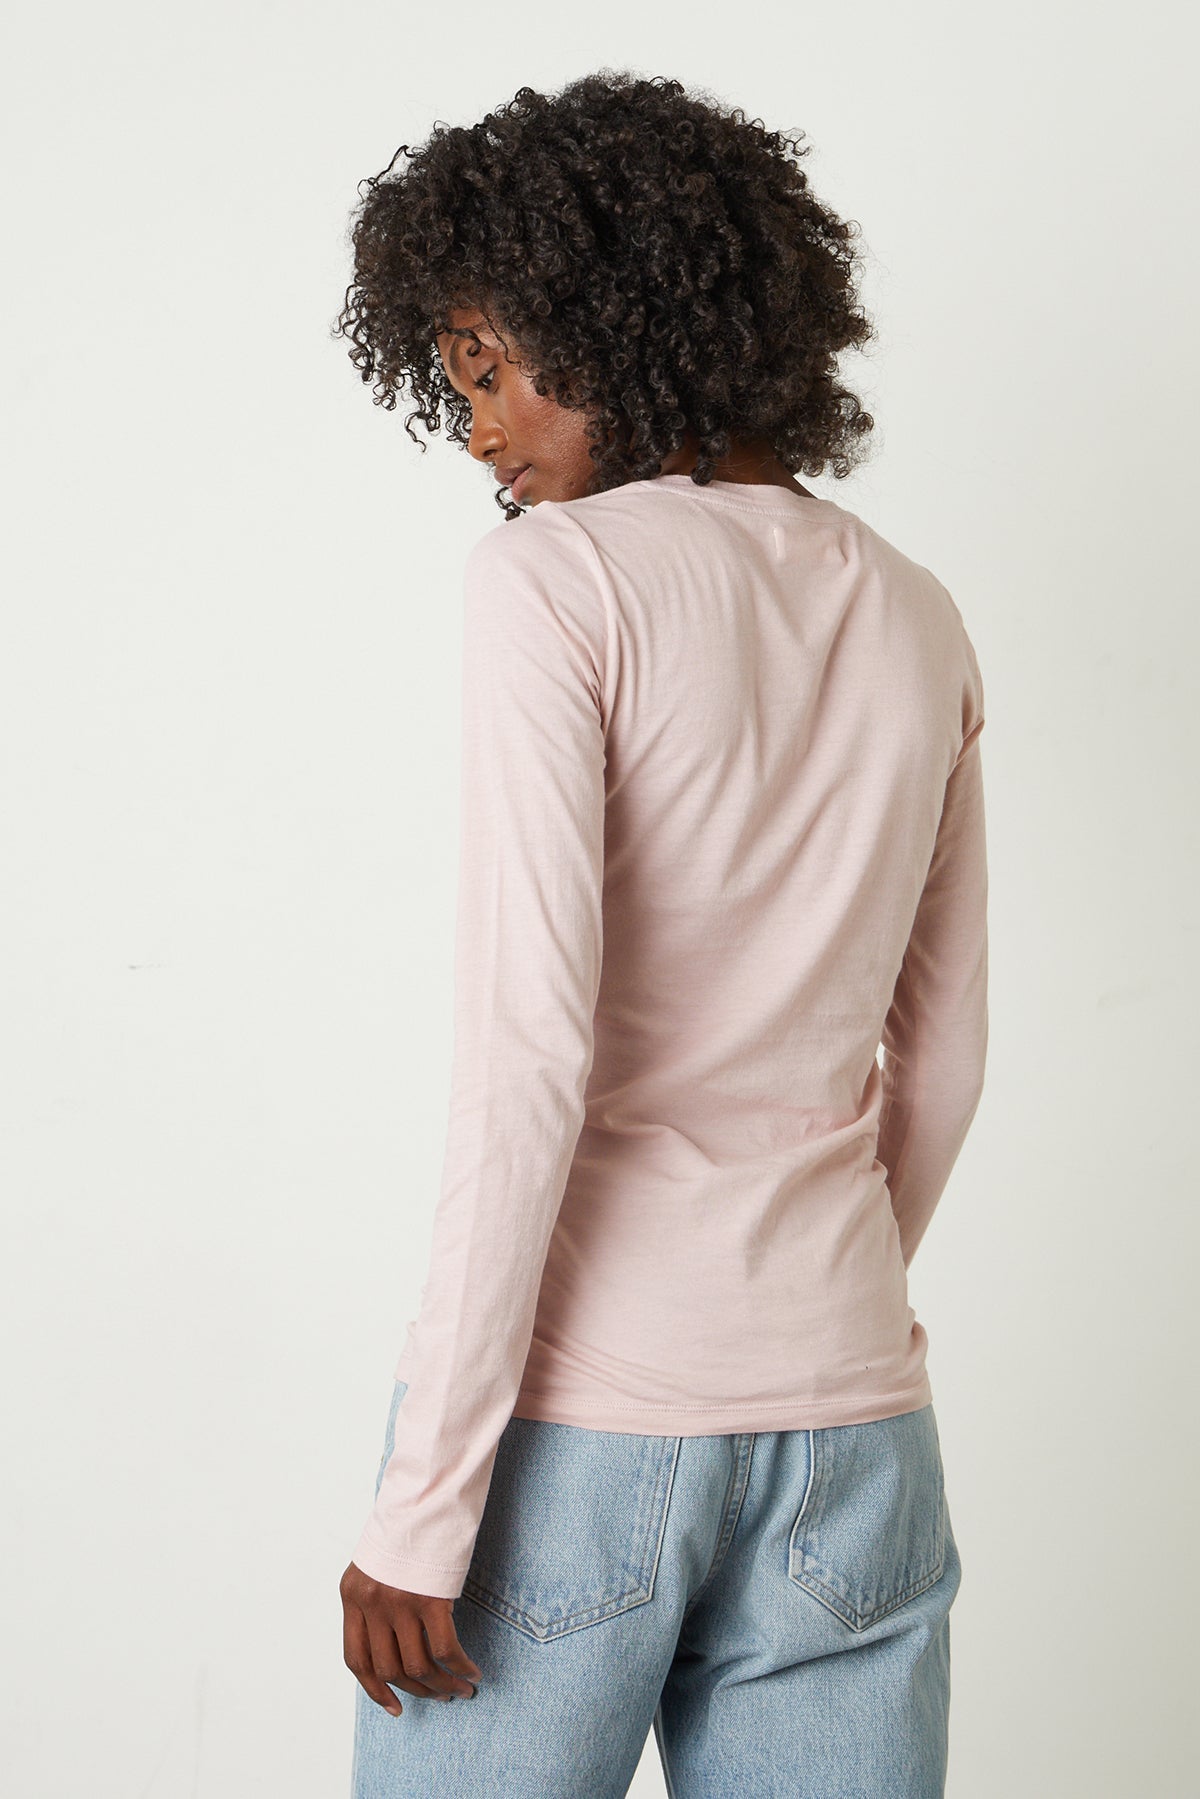   Zofina Gauzy Whisper Fitted Crew Neck Tee with long sleeves in light pink ribbon color and light blue denim back 